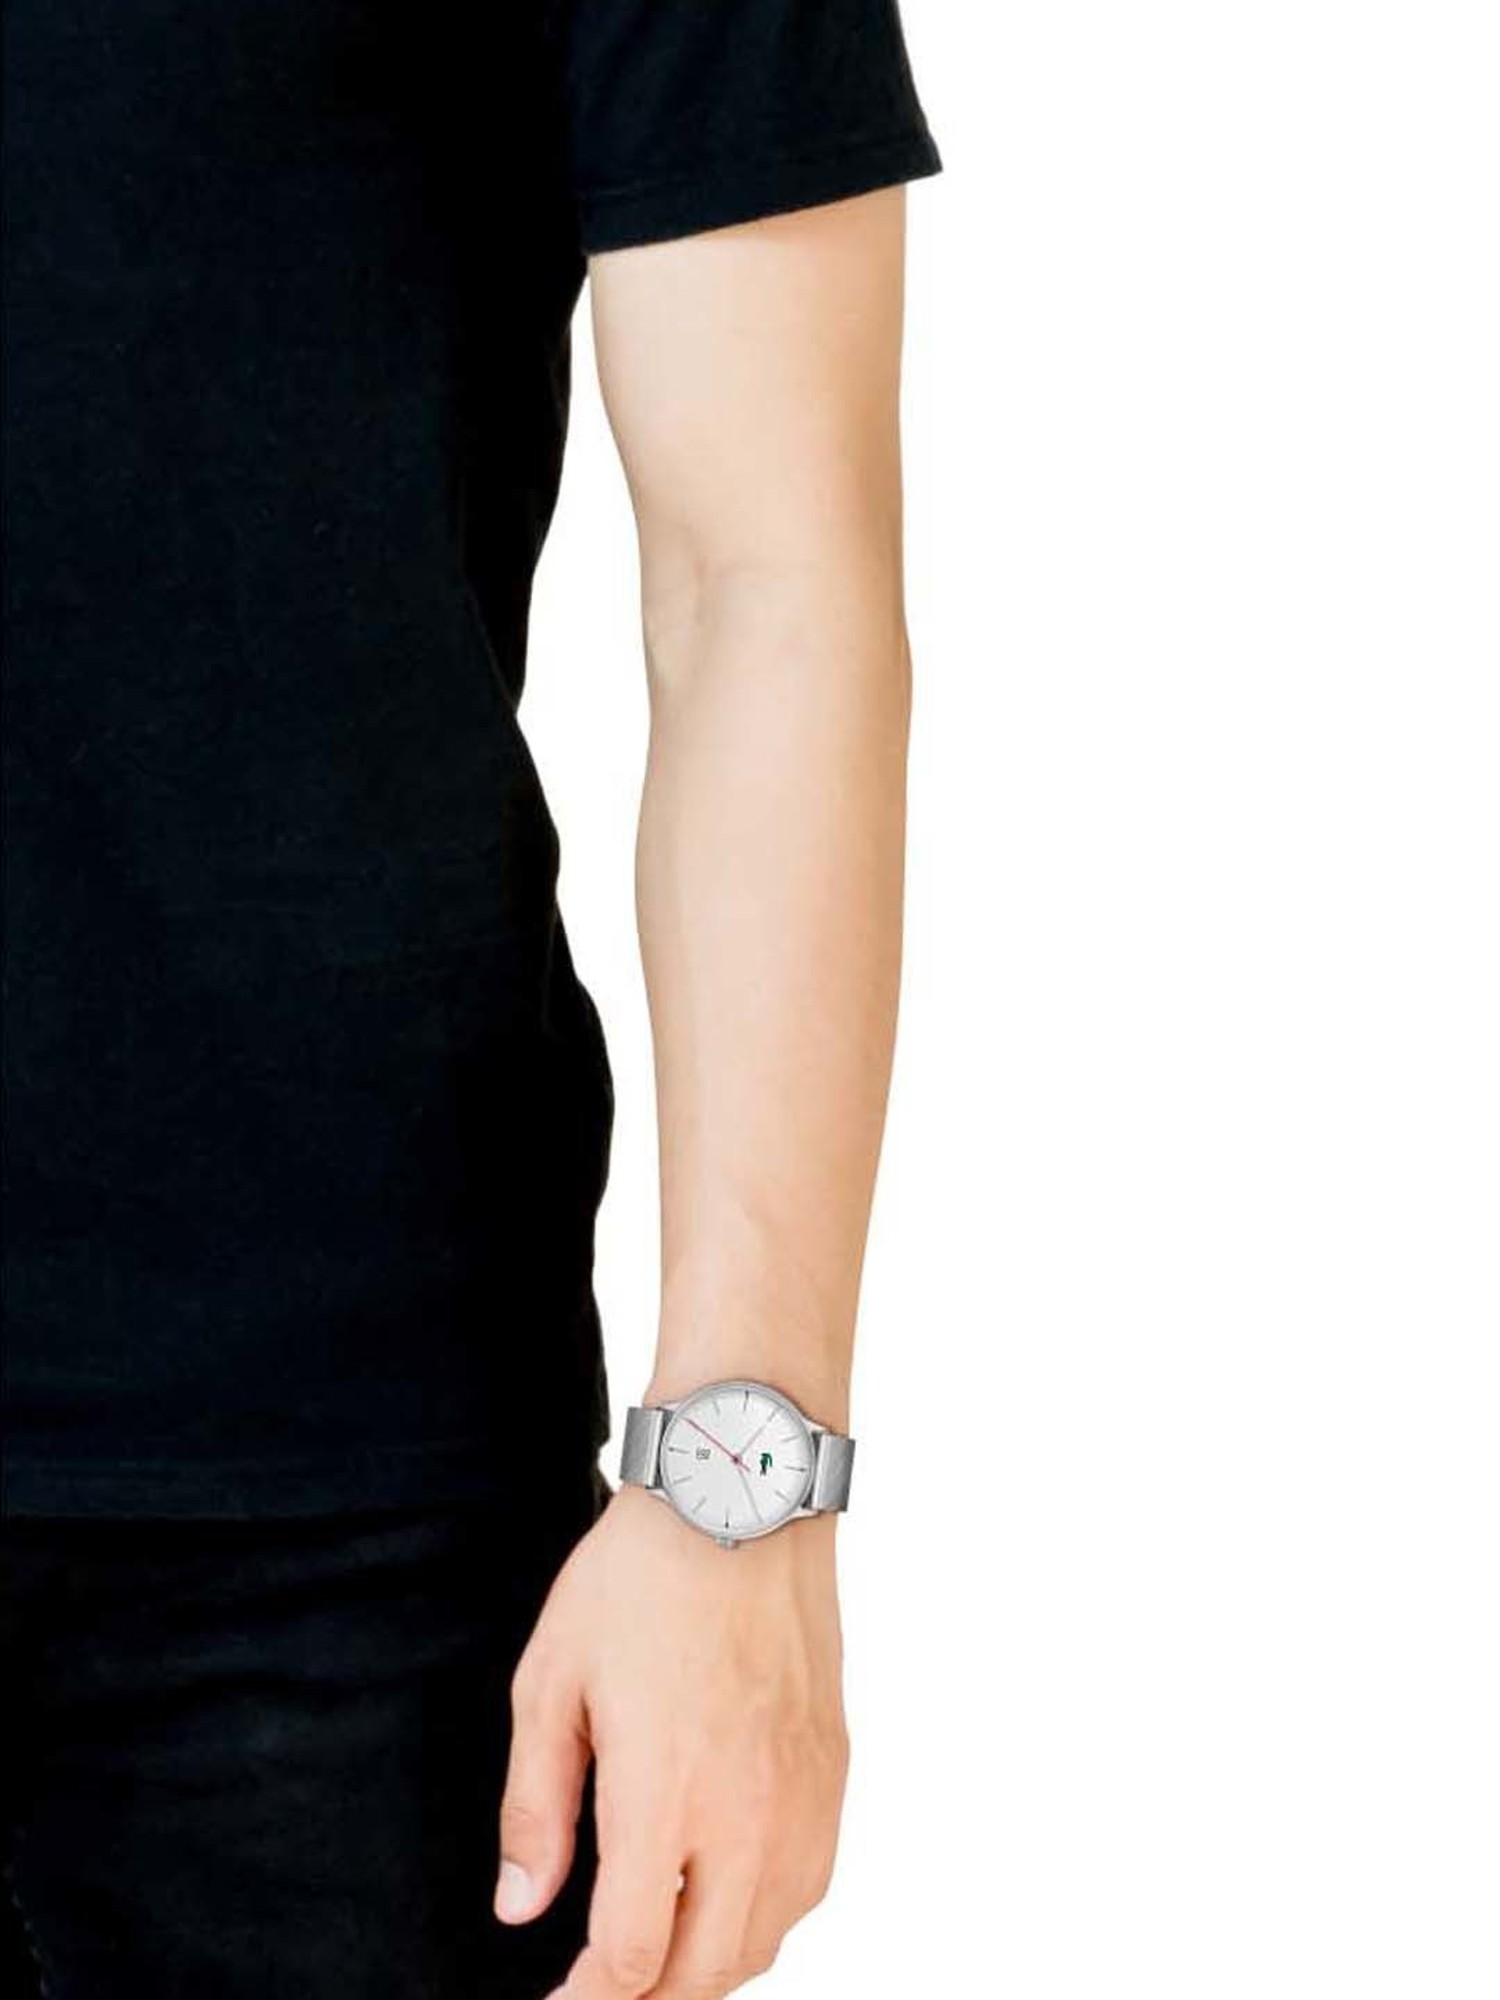 Buy Lacoste 2011201 Club Analog Watch for Men at Best Price @ Tata CLiQ